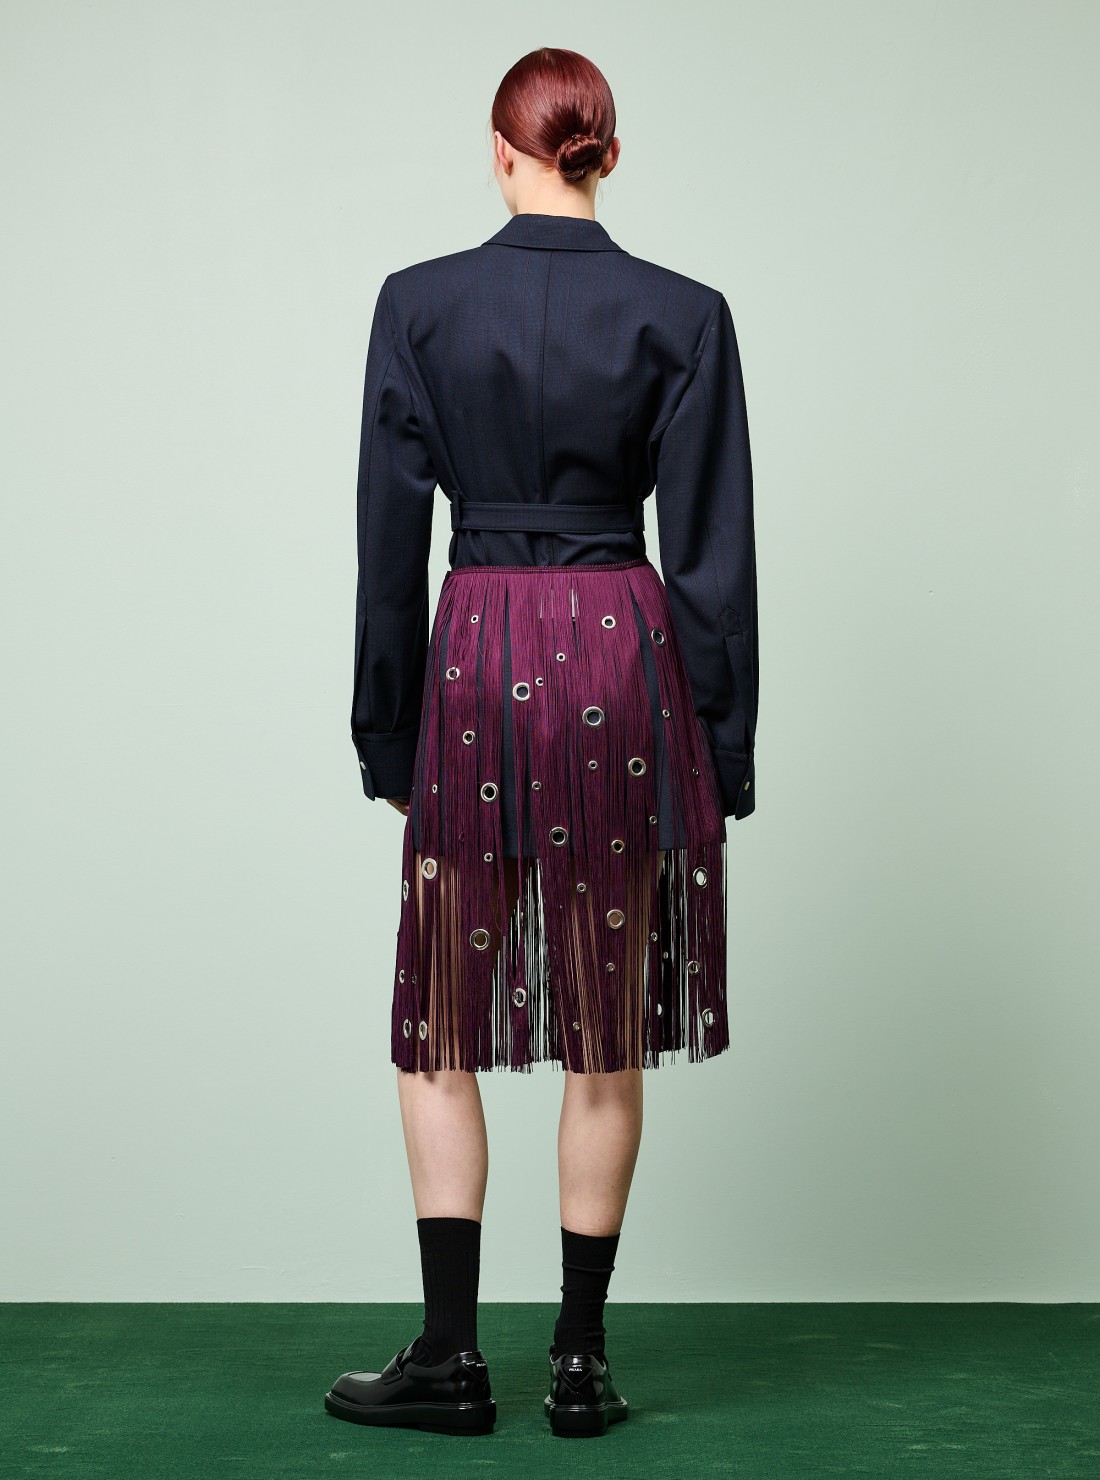 skirt with eyelet